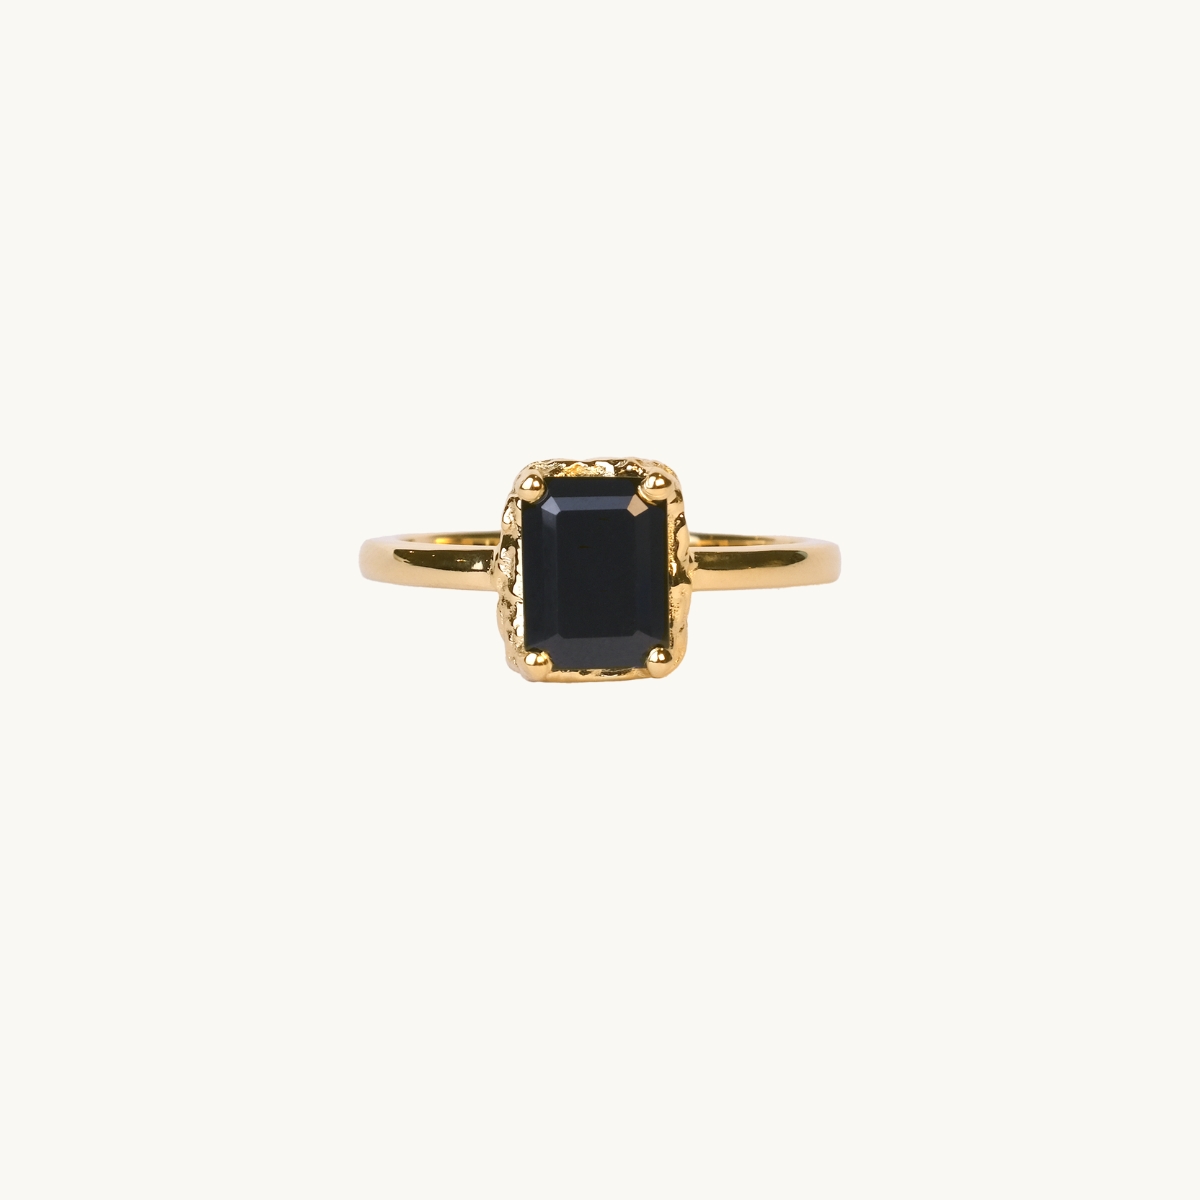 A gold ring with a rectangular black spinel